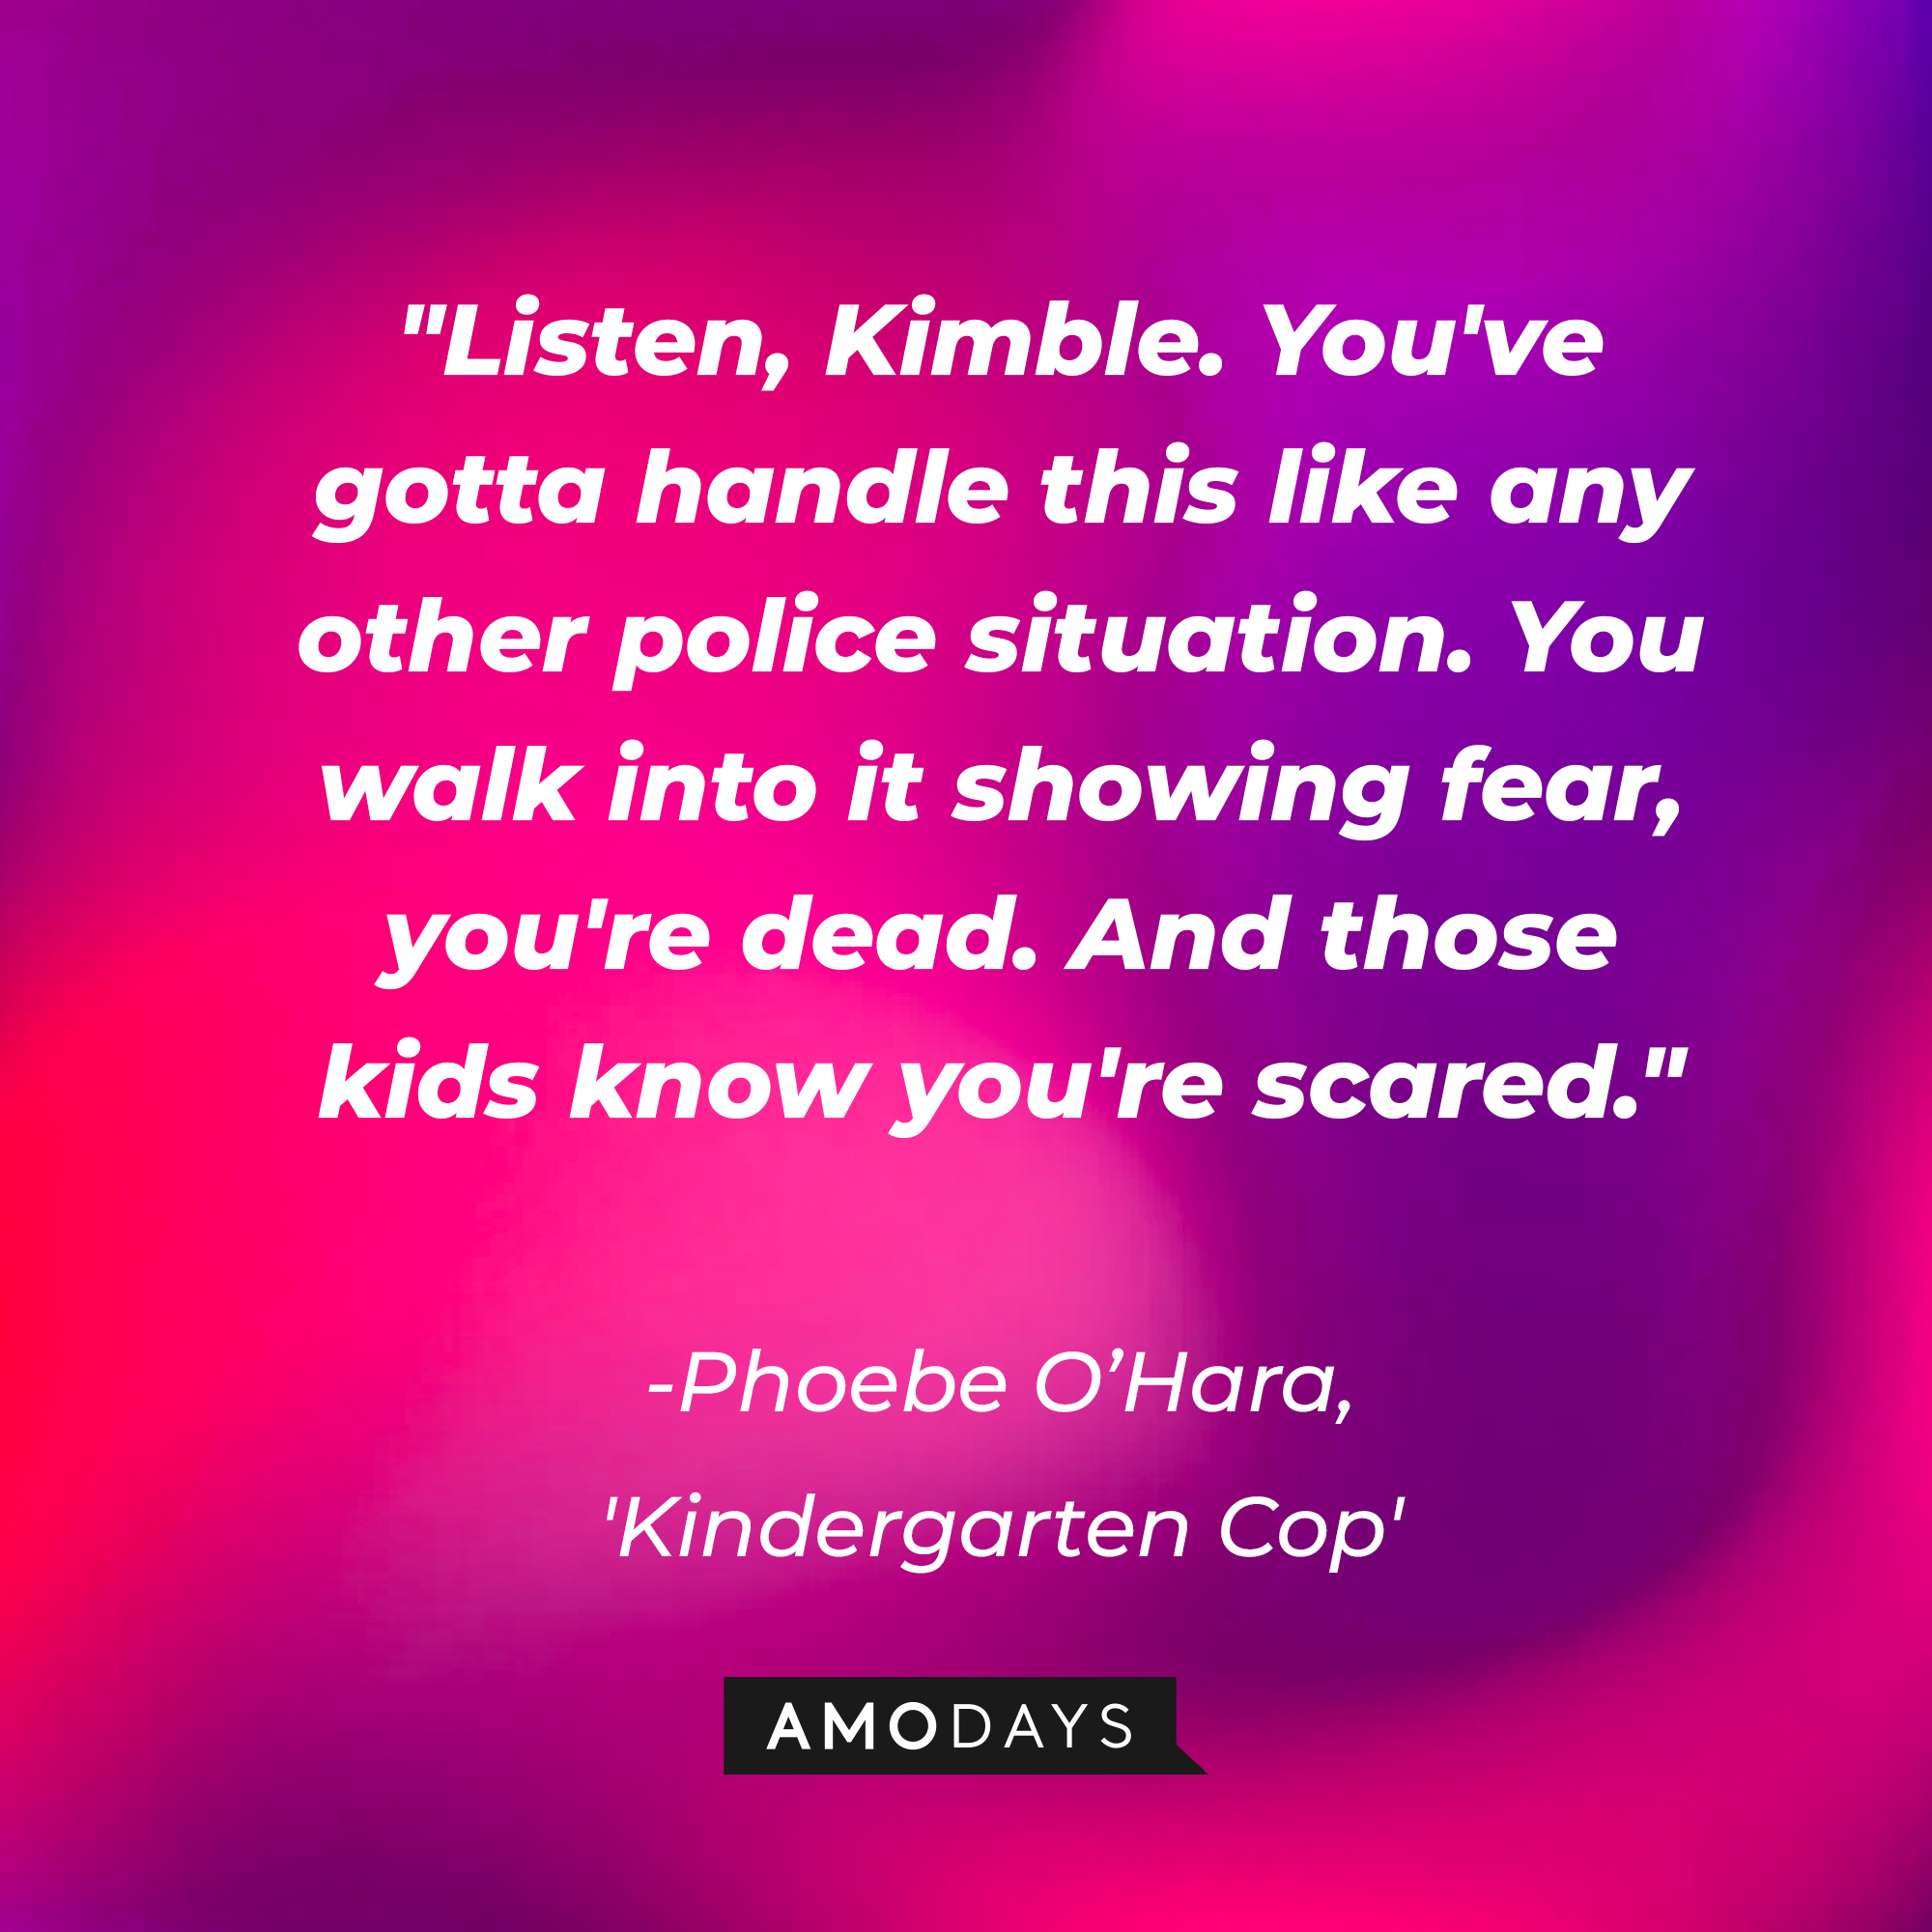 Detective Phoebe O'Hara's quote in "Kindergarten Cop:" "Listen, Kimble. You've gotta handle this like any other police situation. You walk into it showing fear, you're dead. And those kids know you're scared." | Source: AmoDays